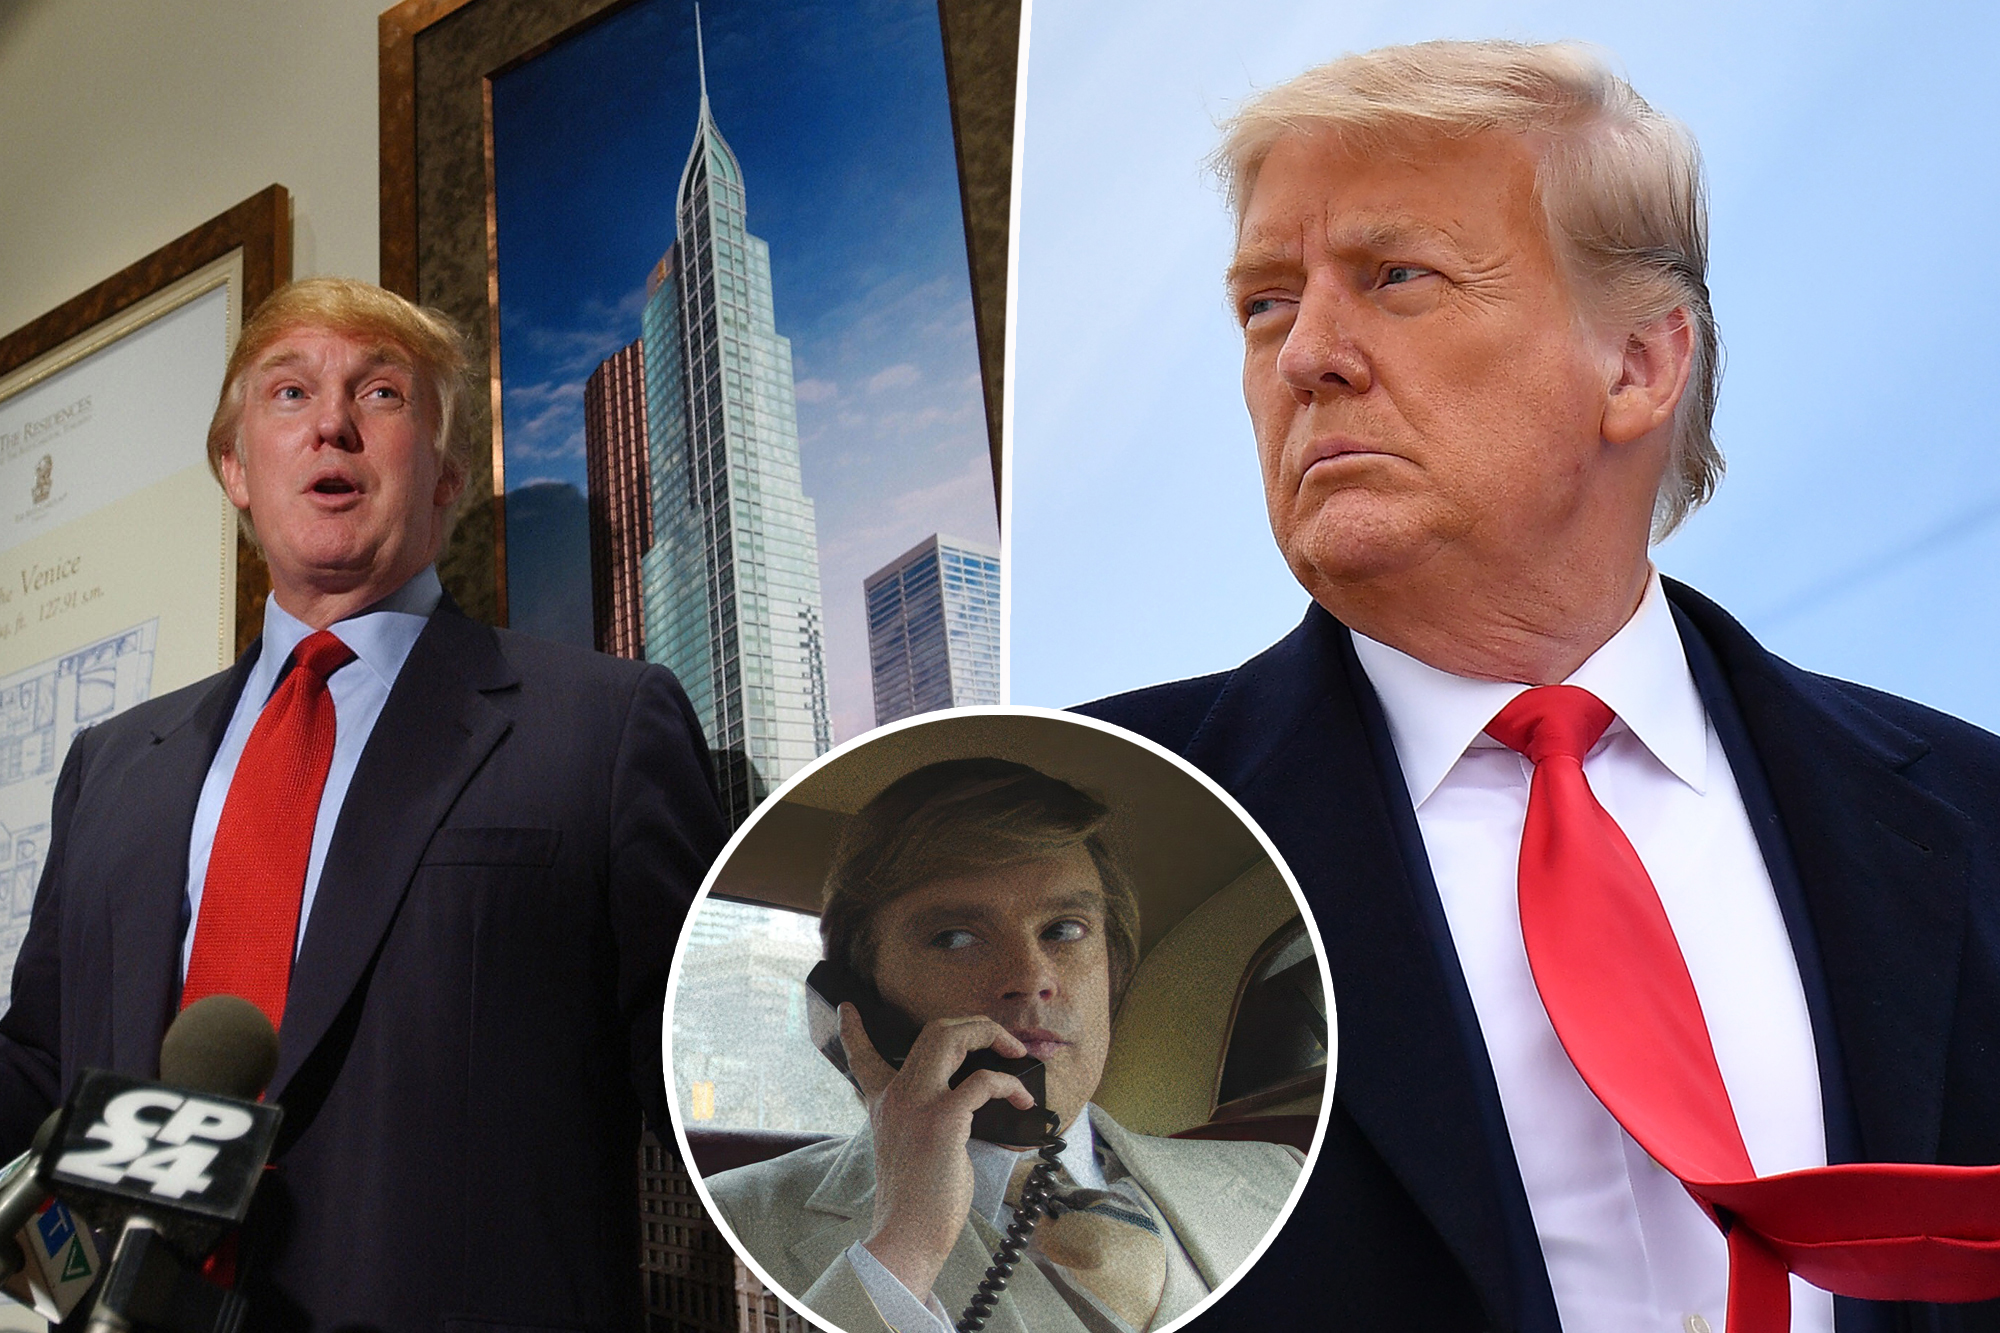 Donald Trump's Cease-and-Desist Letter Sparks Controversy Over 'The Apprentice' Biopic